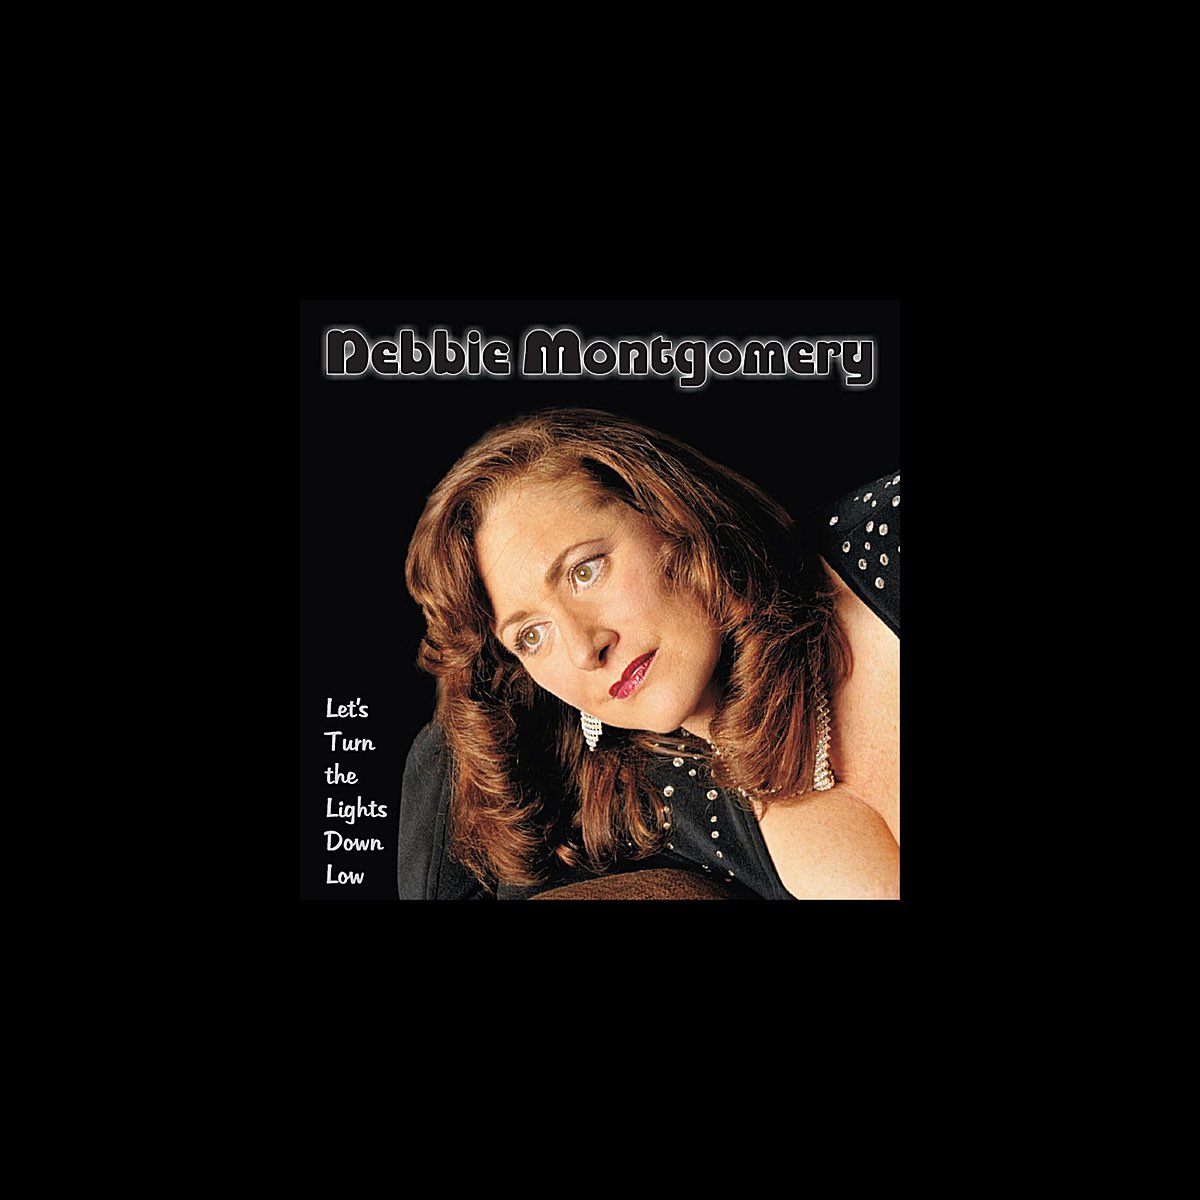 Let's Turn the Lights Down Low by Debbie Montgomery on Apple Music